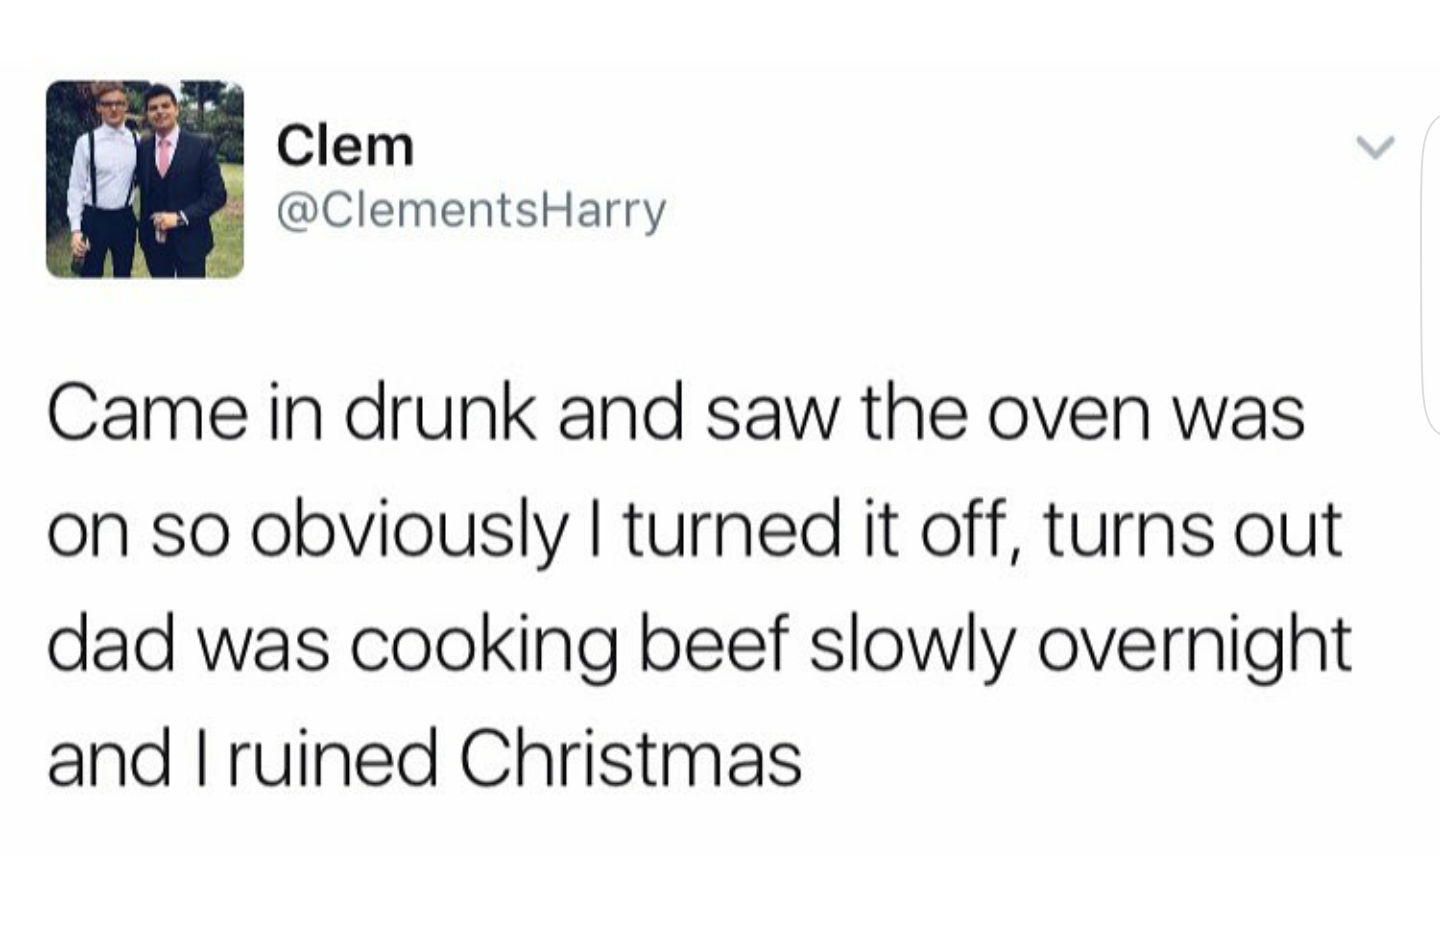 funny story tweet about someone who came home drunk and ruined christmas